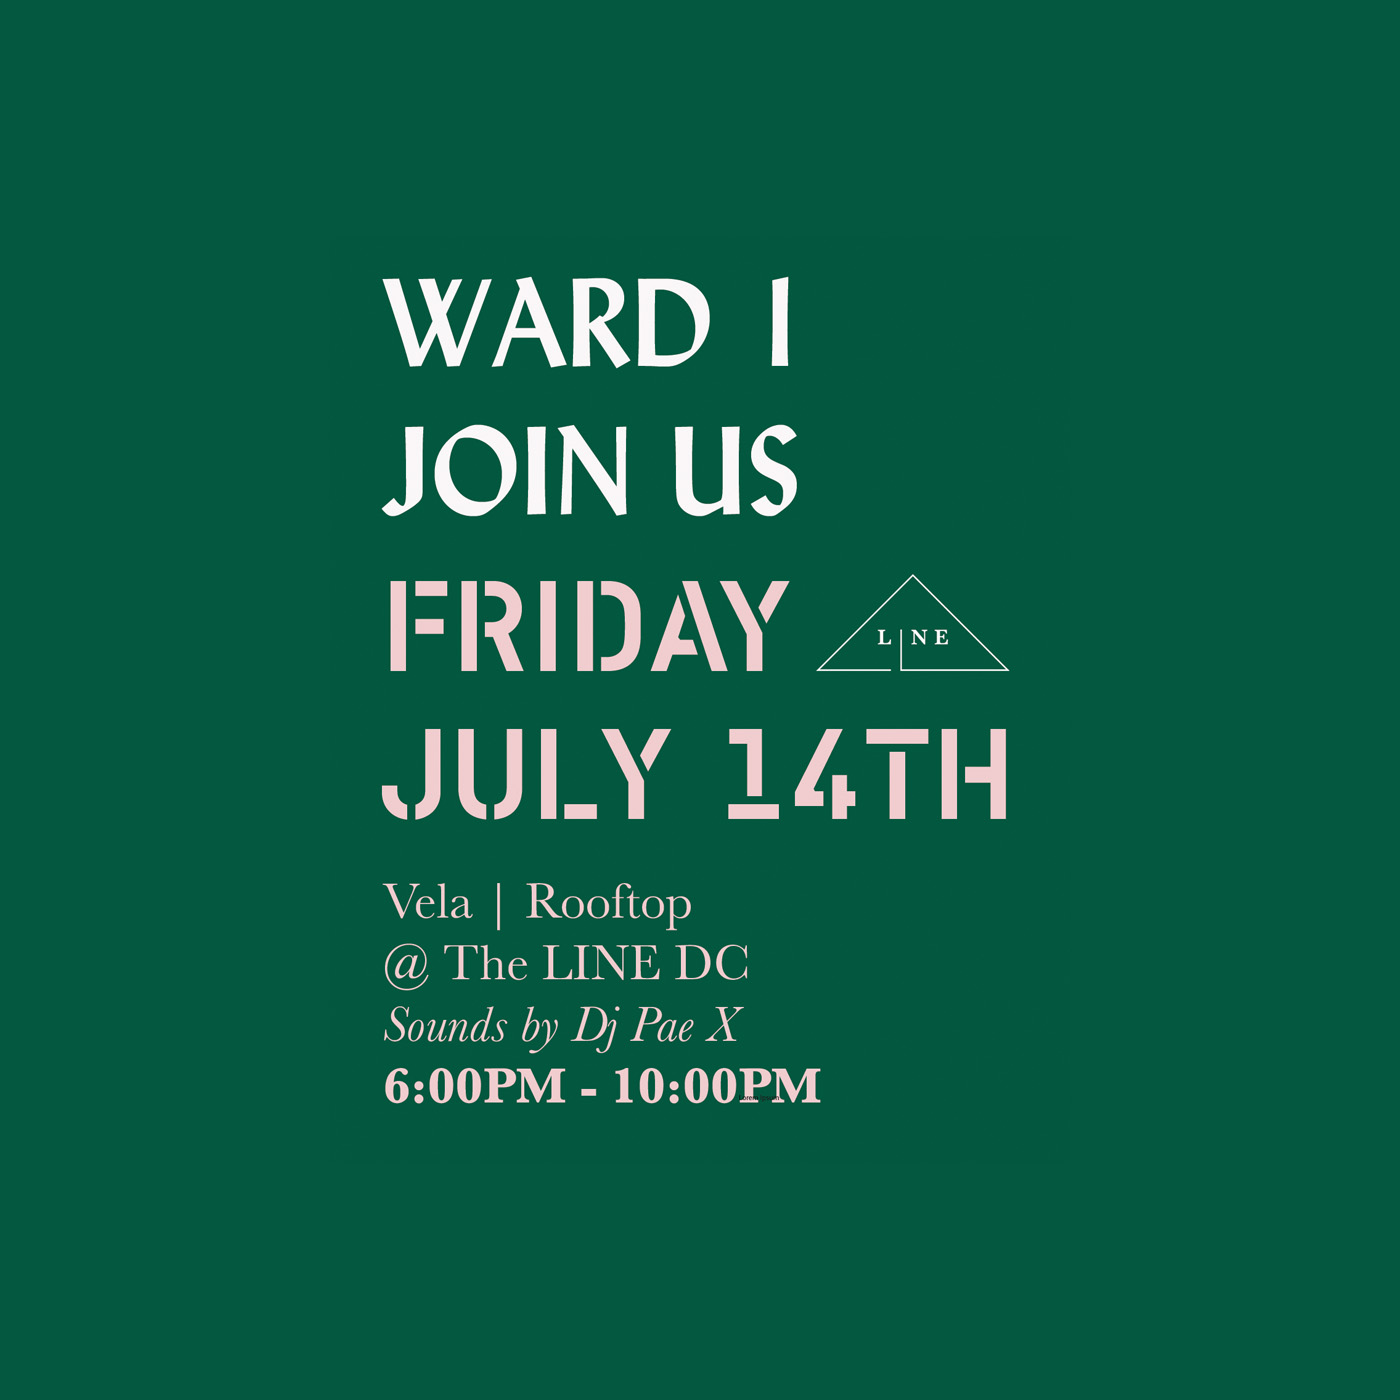 July 14th - Ward 1 Party at the LINE DC Rooftop